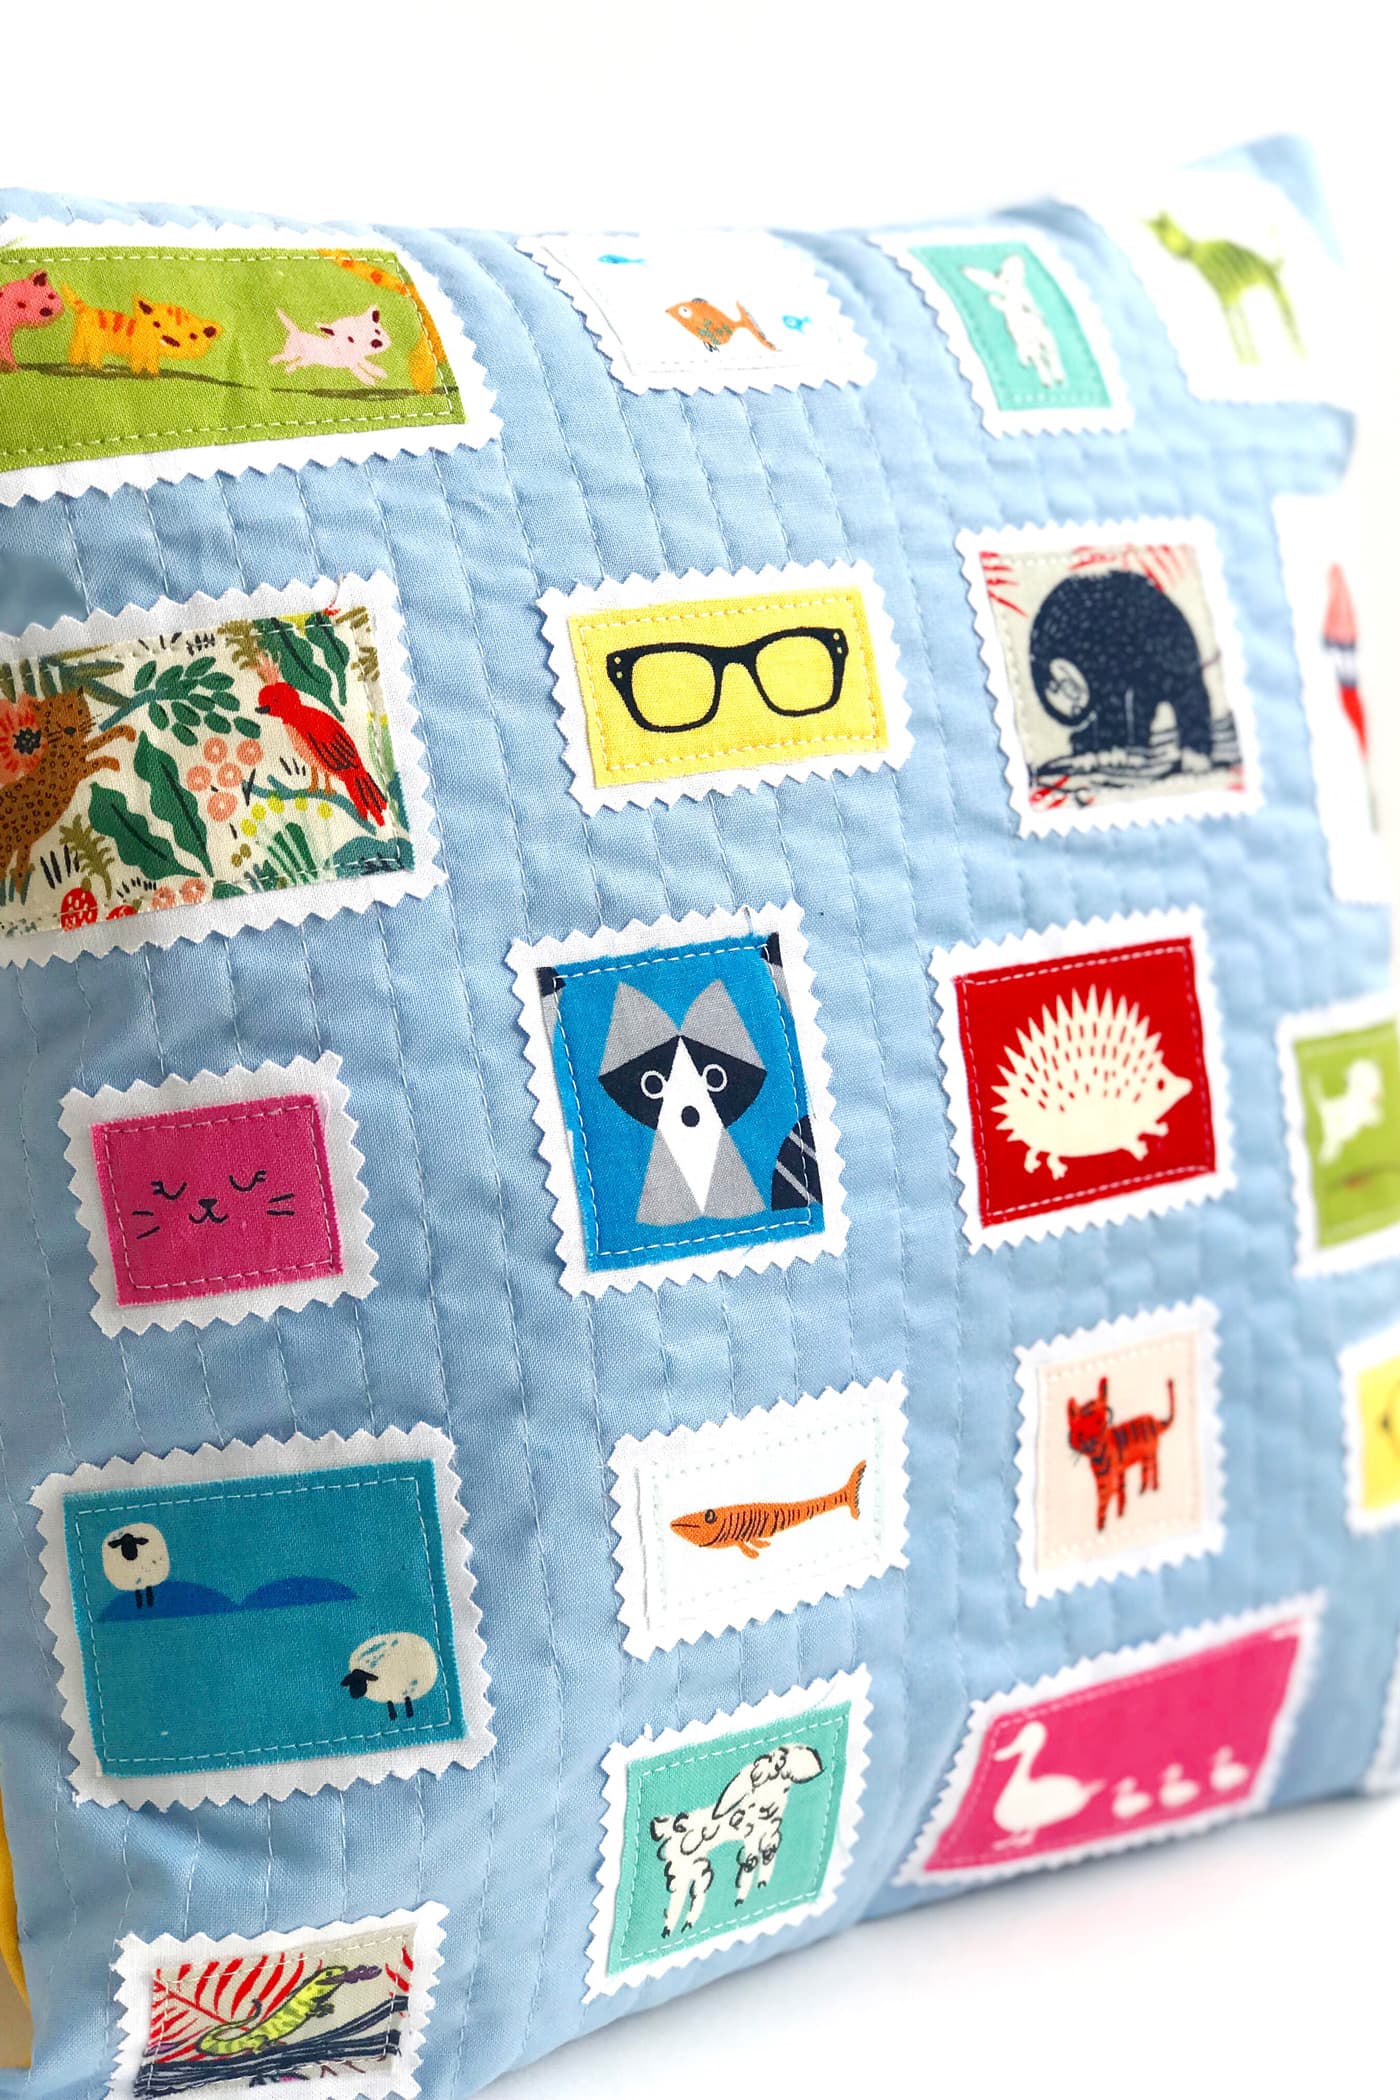 Postage Stamp Pillow